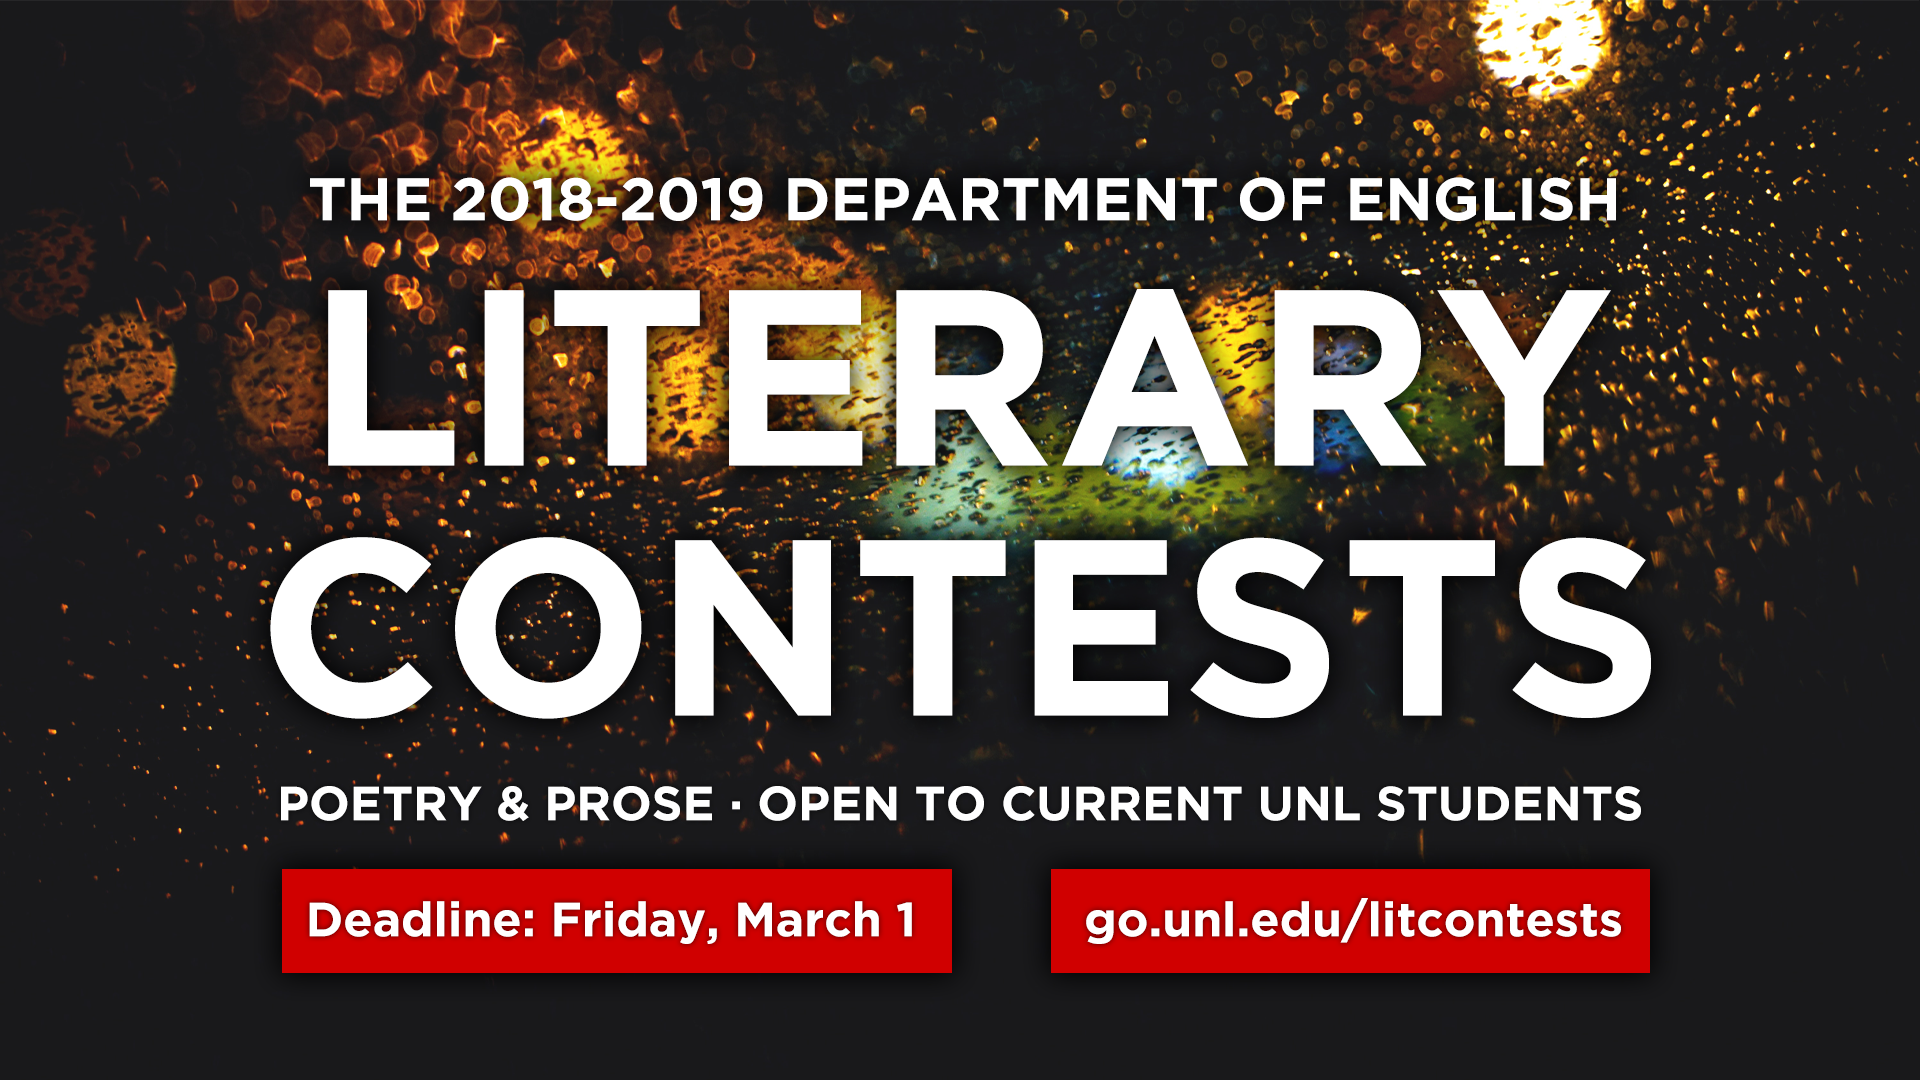 Image with text - The 2018-2019 Department of English Literary Contests - Poetry & Prose - open to current UNL students. Deadline: Friday, March 1. go.unl.edu/litcontests; links to news story